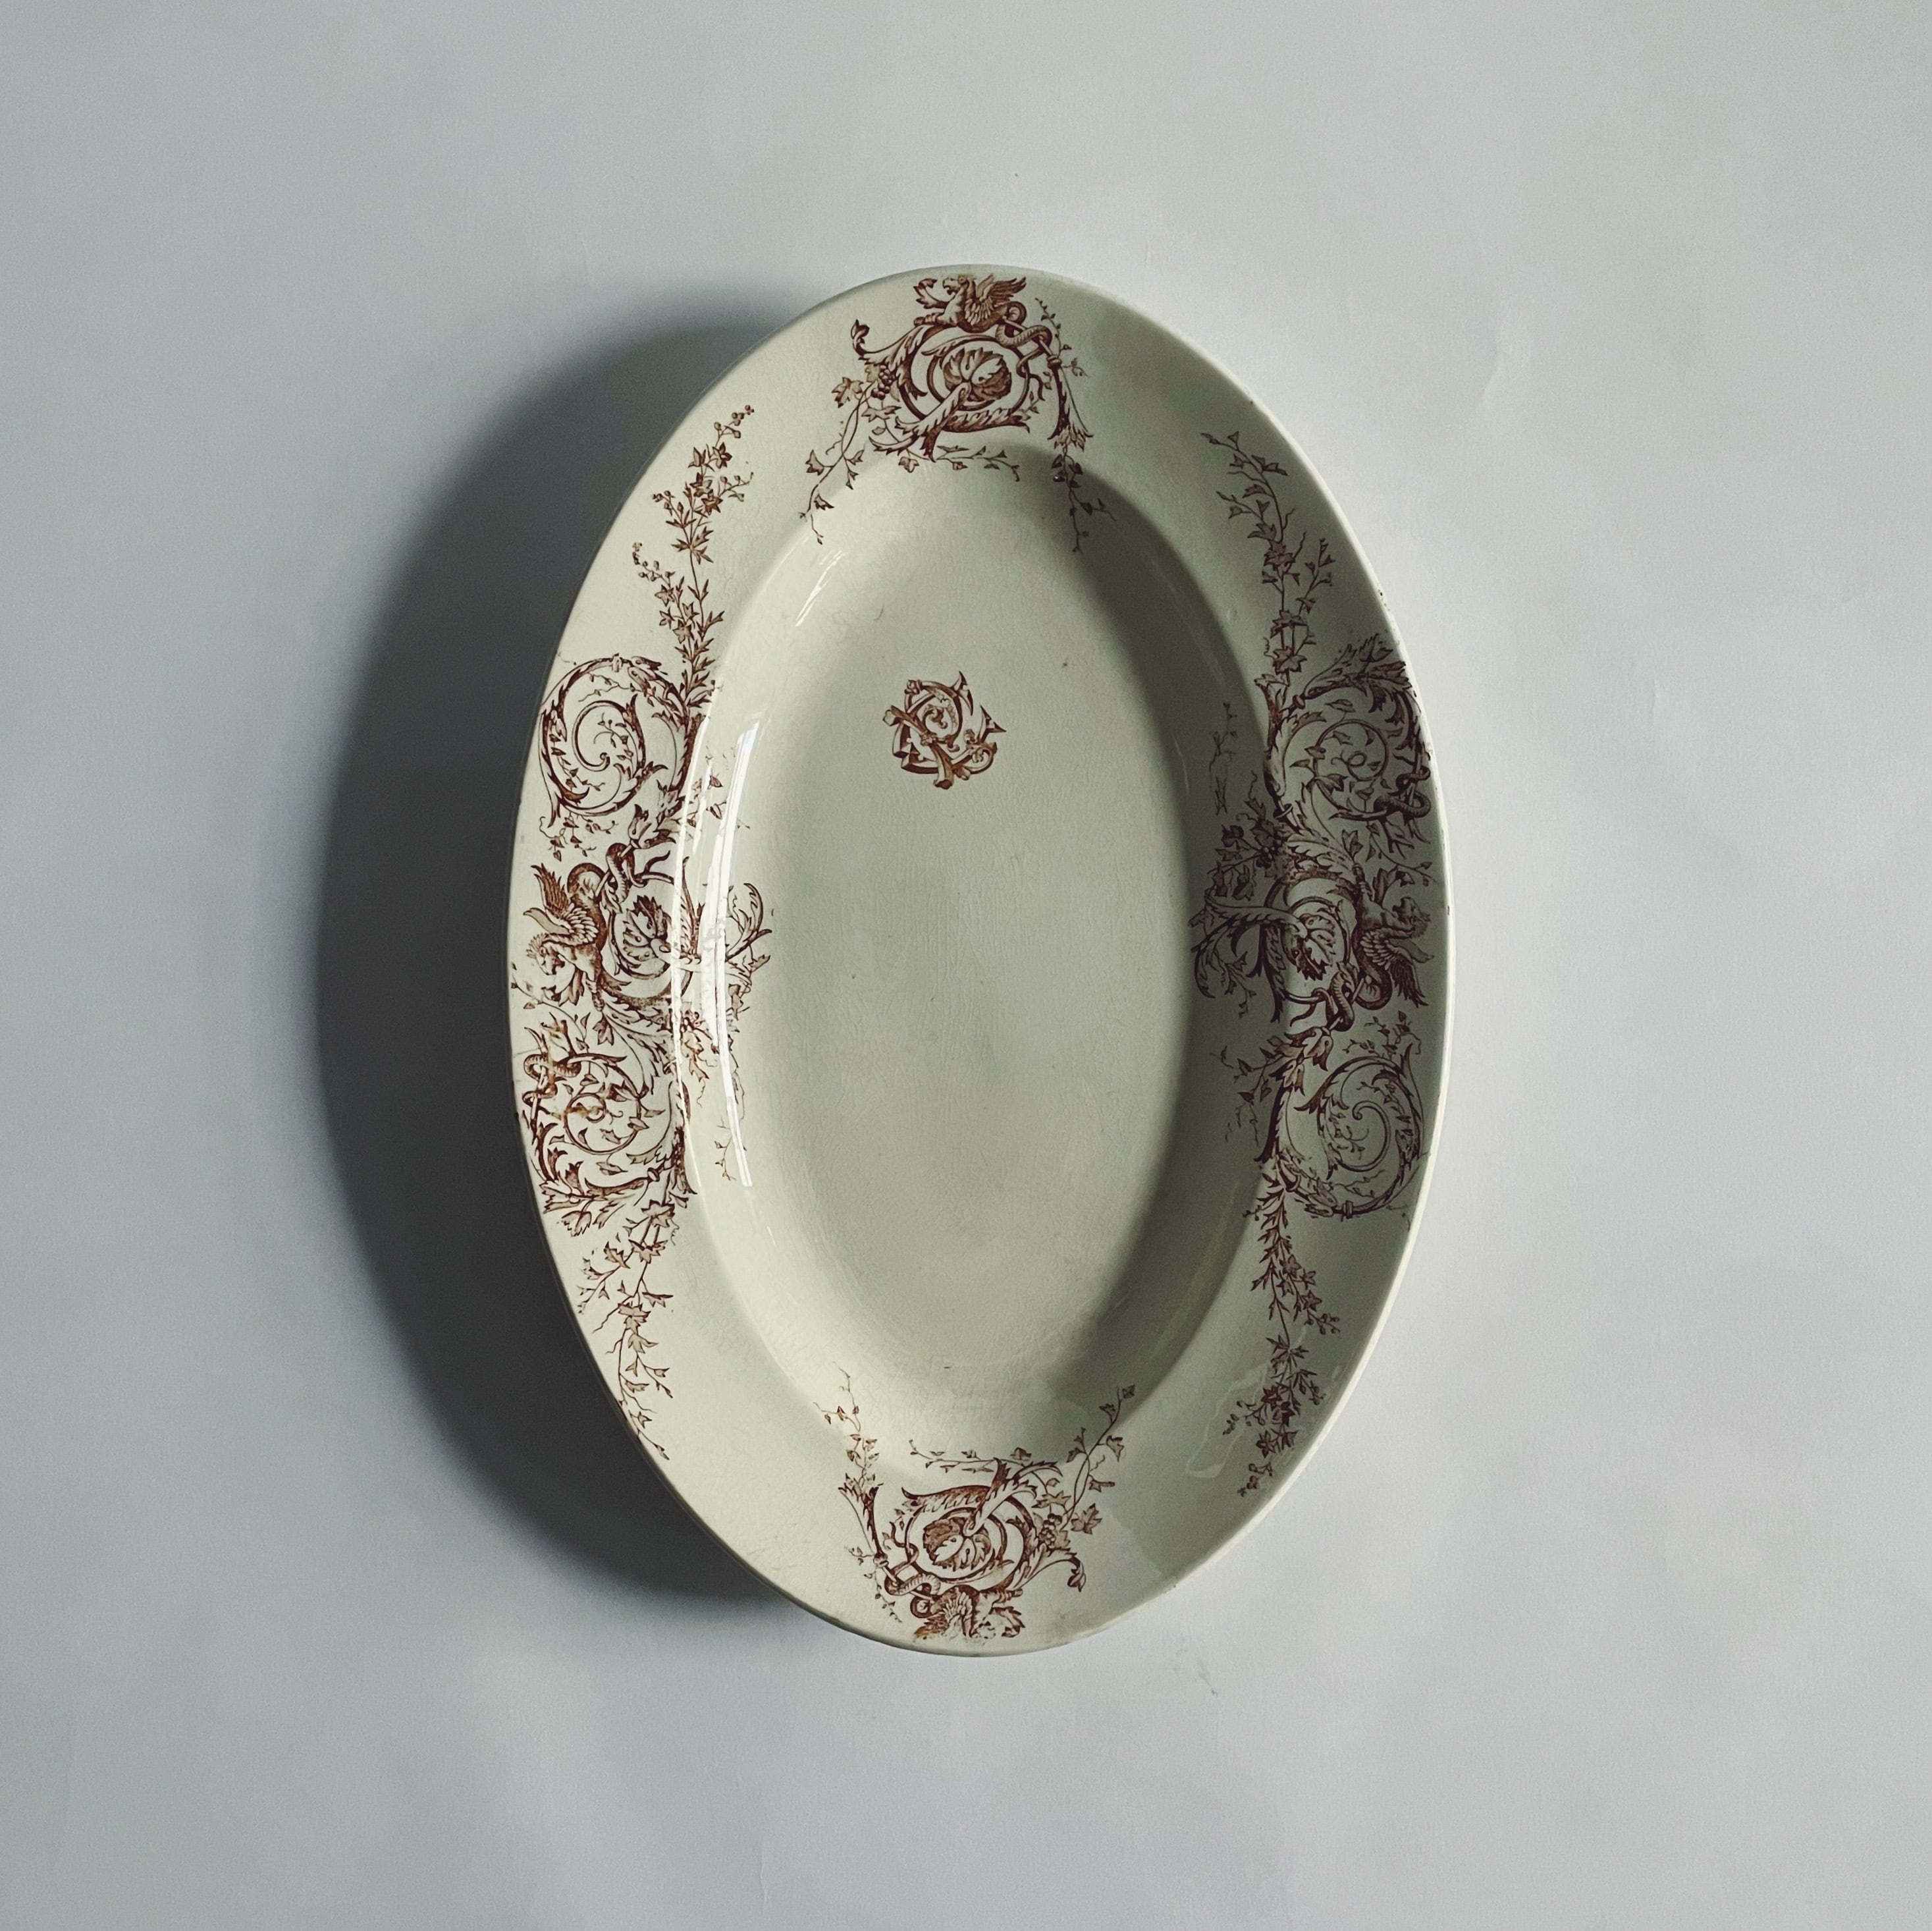 Luneville ”Joinville” Oval plate